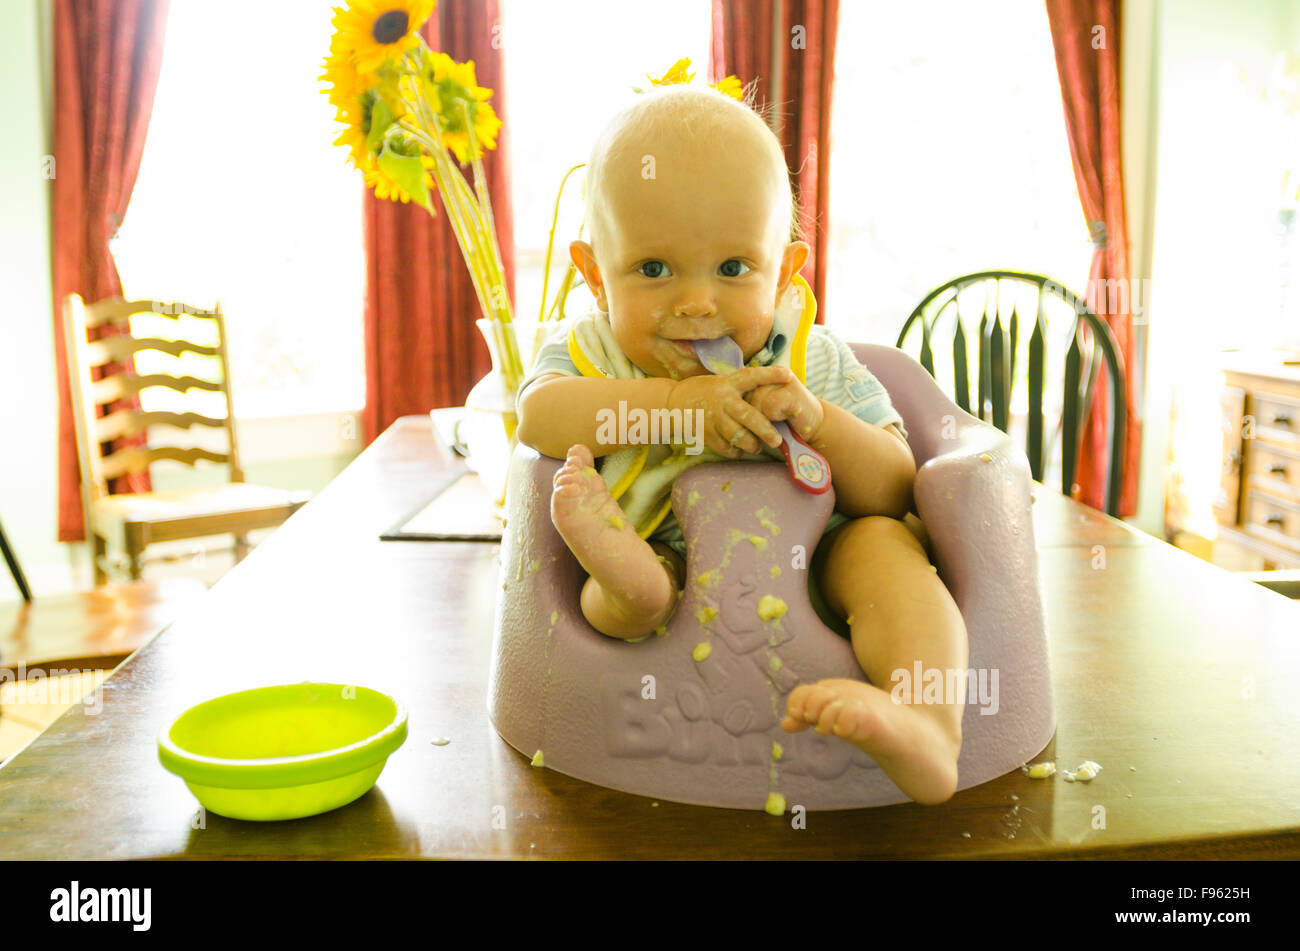 A devilishly cute baby shows the aftermath of a bowl of corn chowder Stock Photo